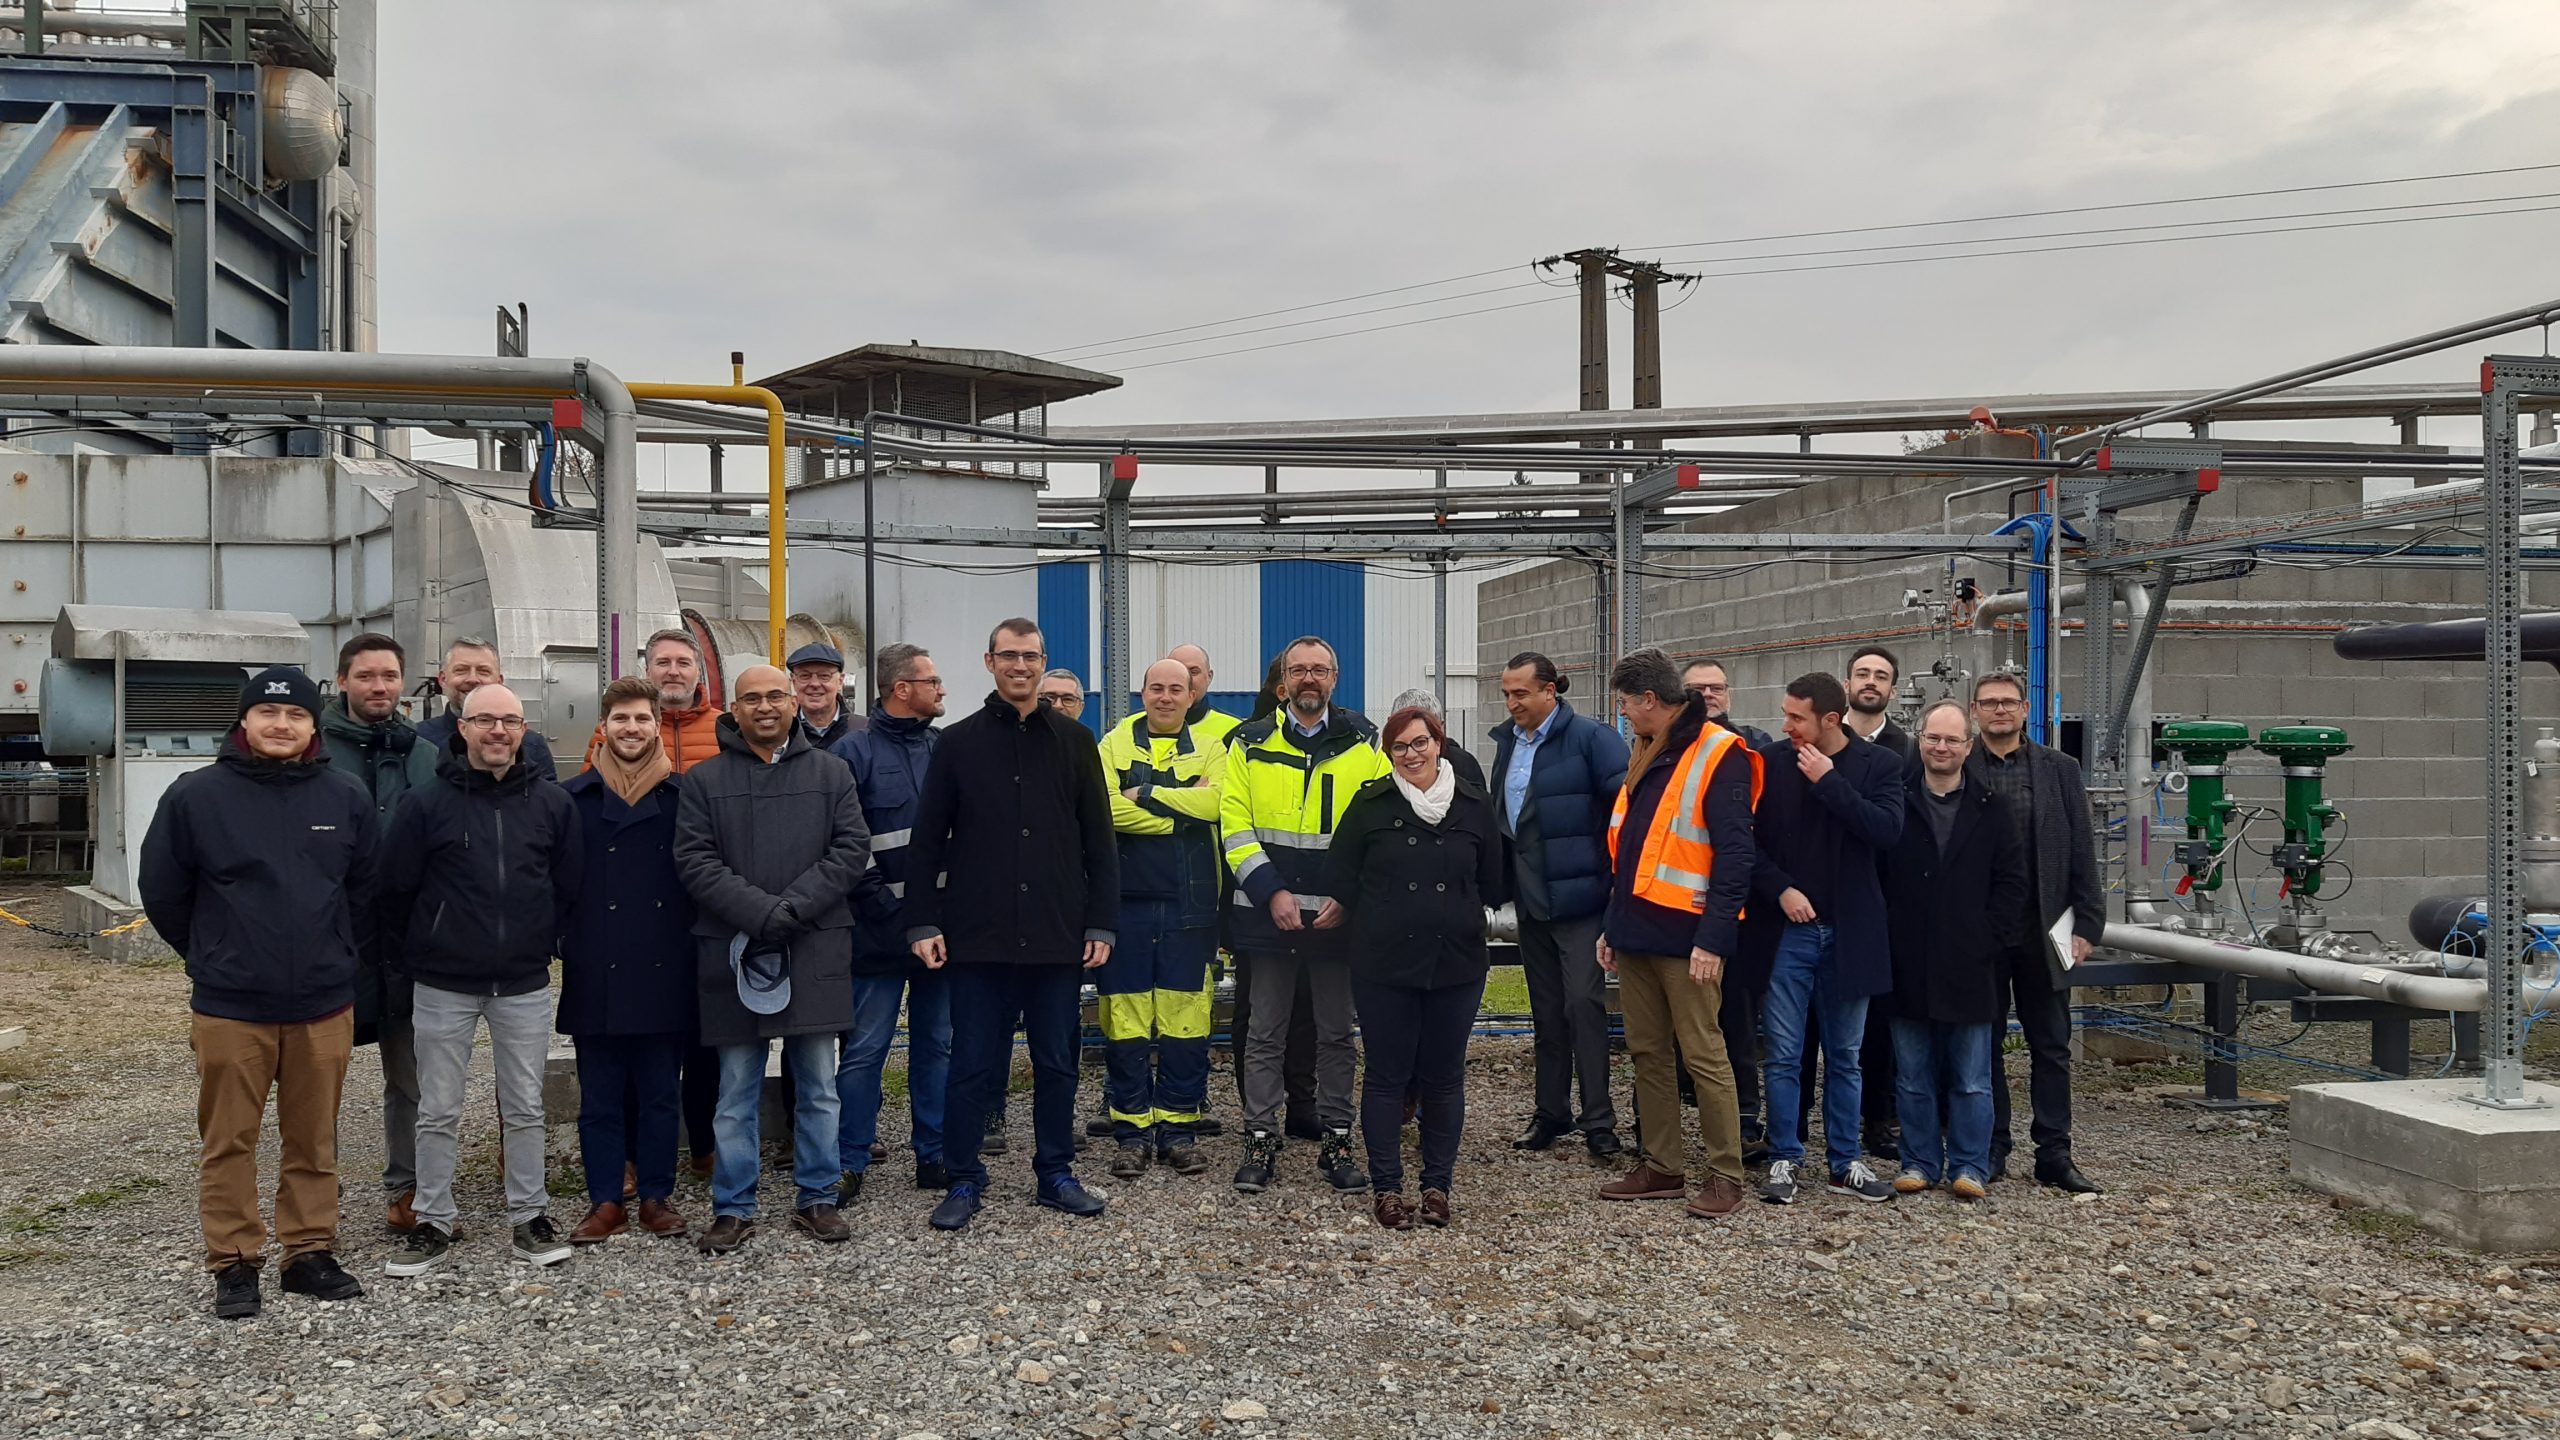 Public demonstration held at the HYFLEXPOWER test site Hyflexpower